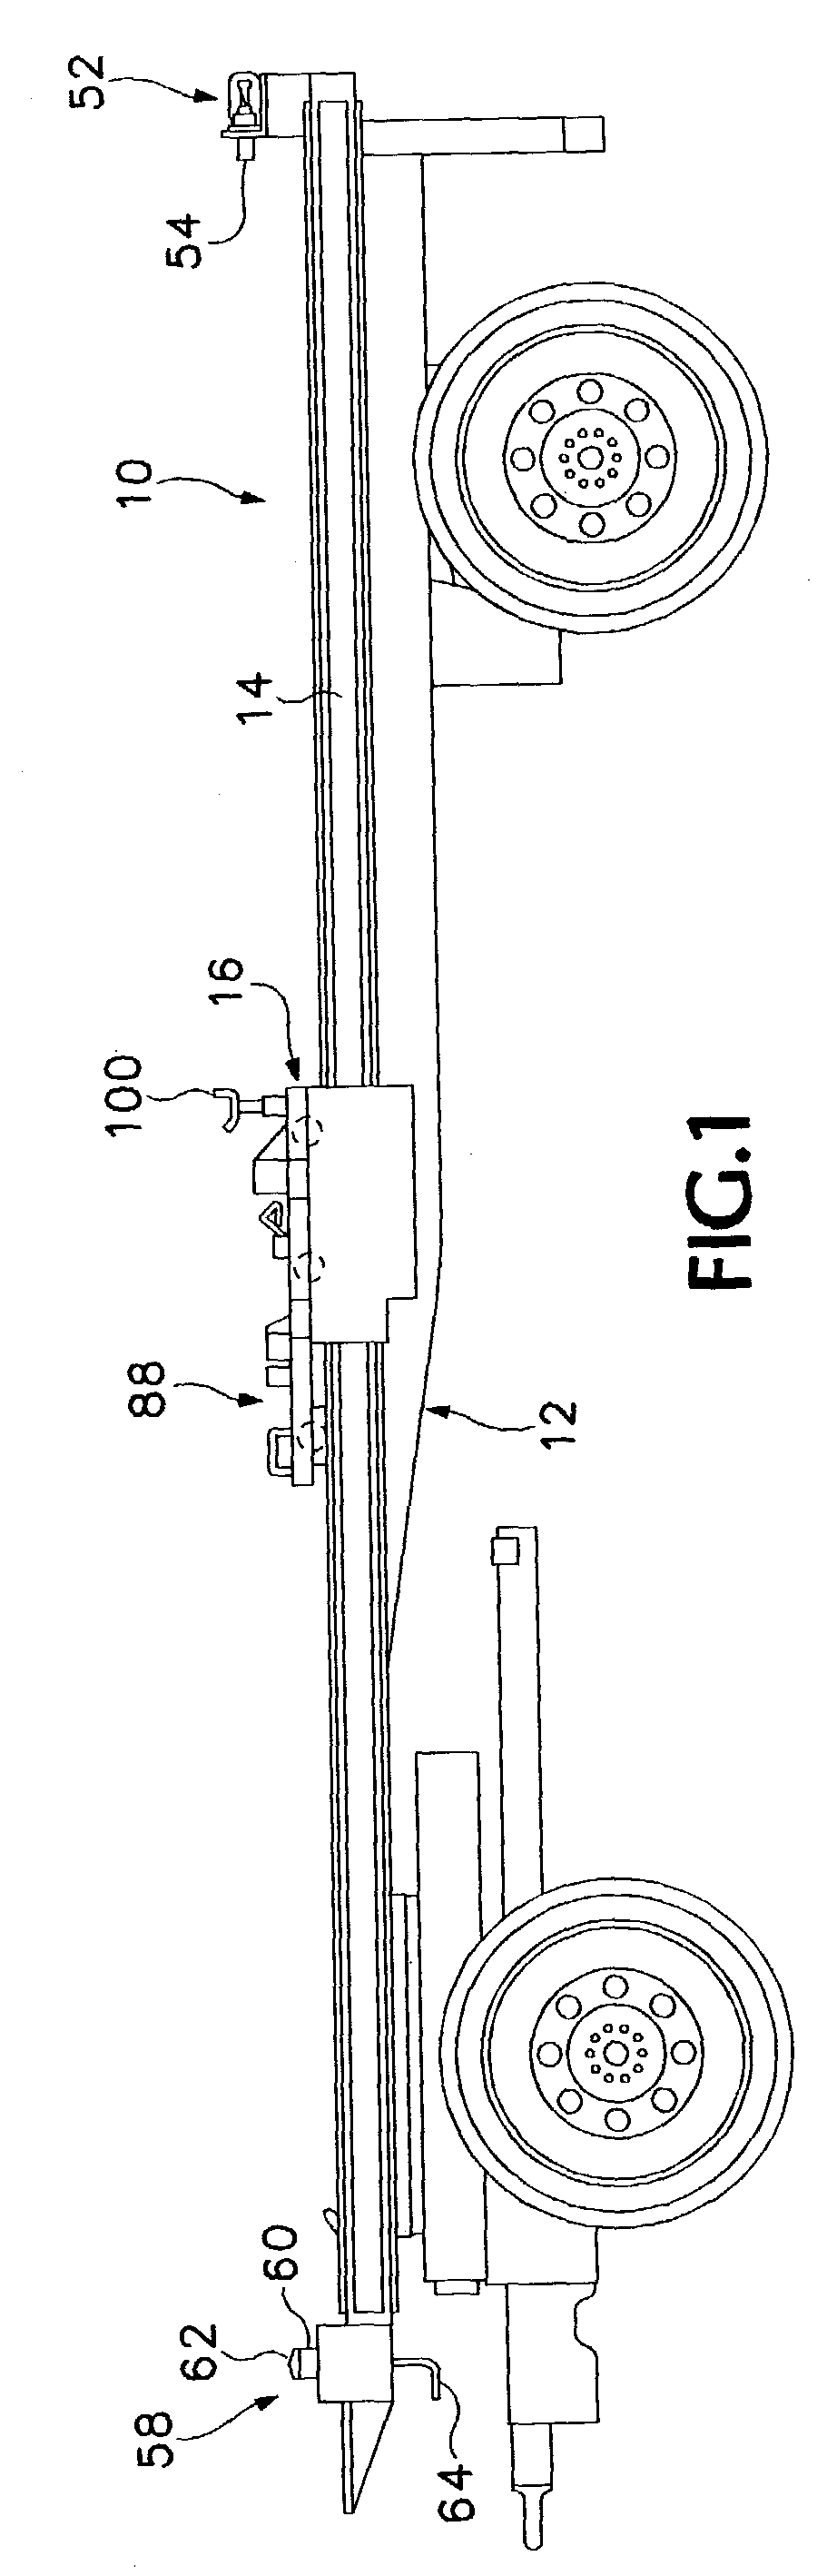 Apparatus for transferring containers and flat racks from a truck to a trailer